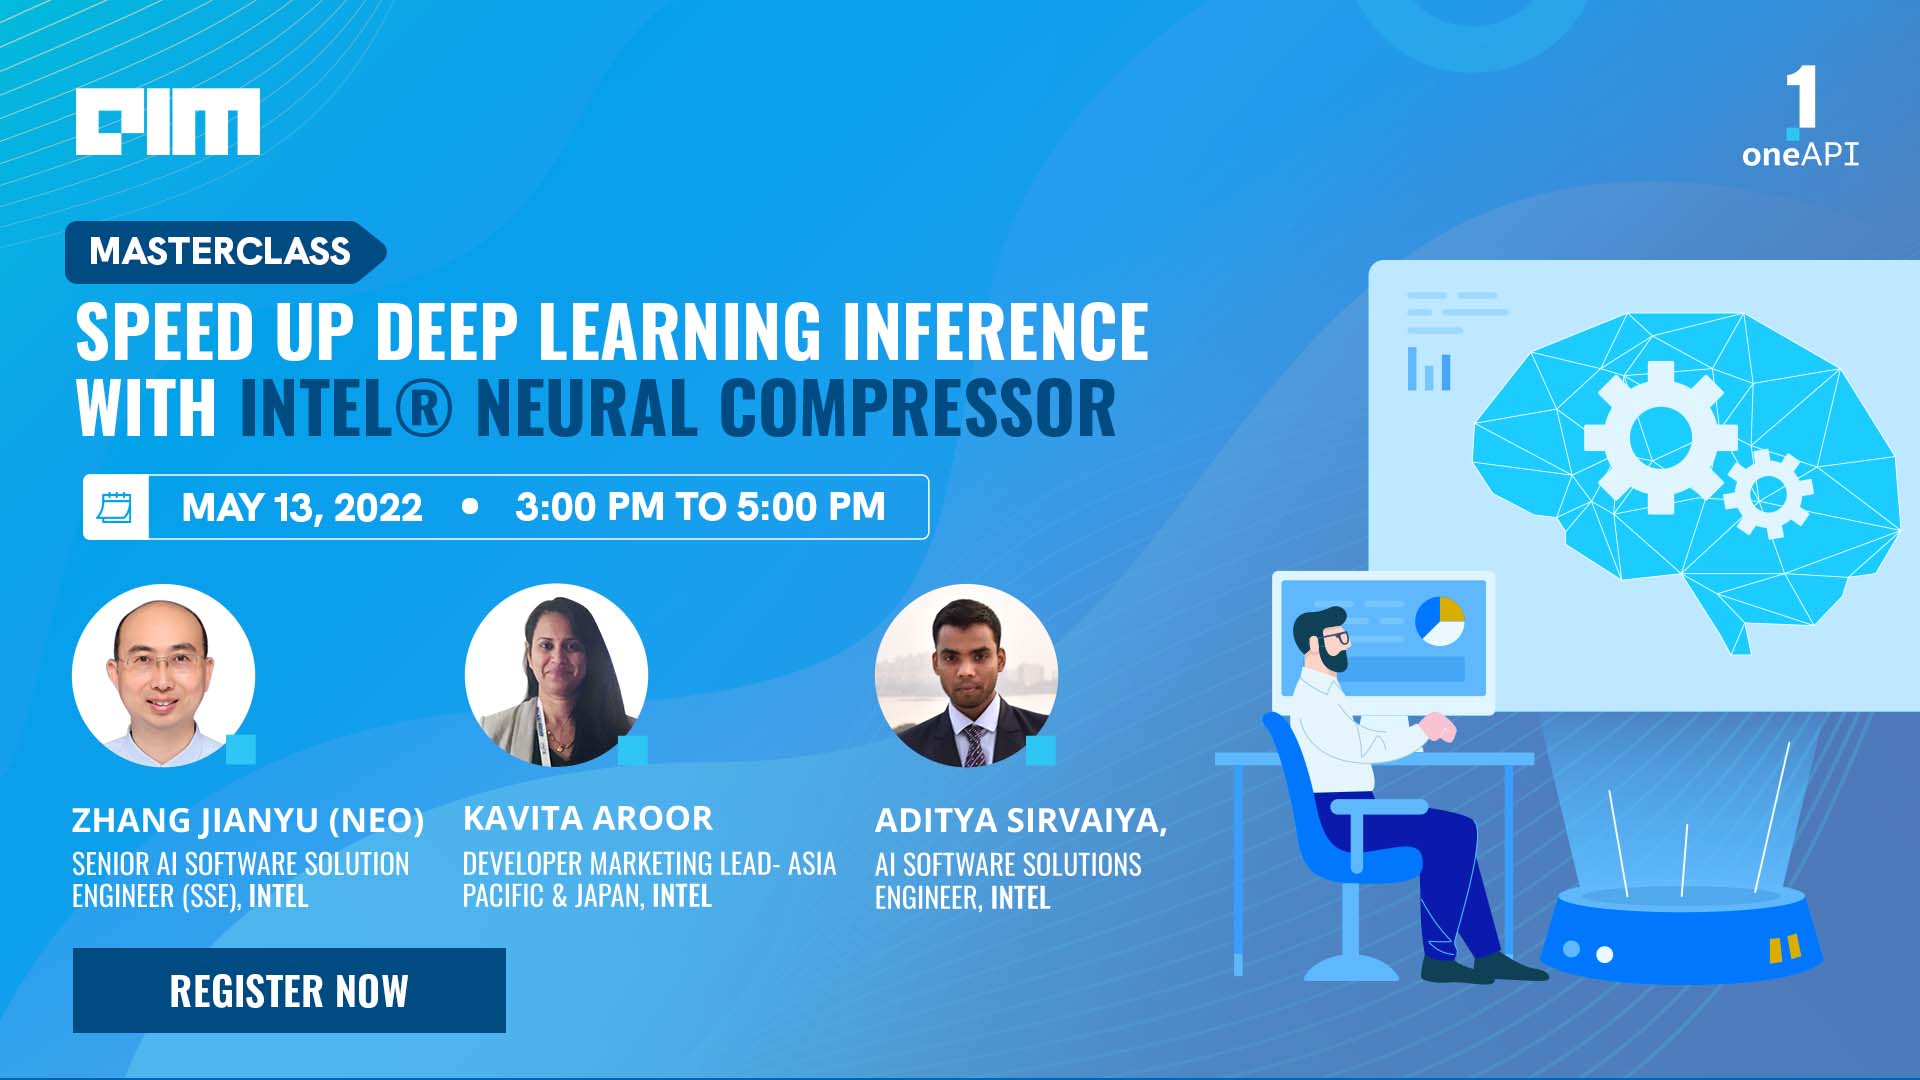 Join this masterclass on ‘Speed up deep learning inference with Intel® Neural Compressor’